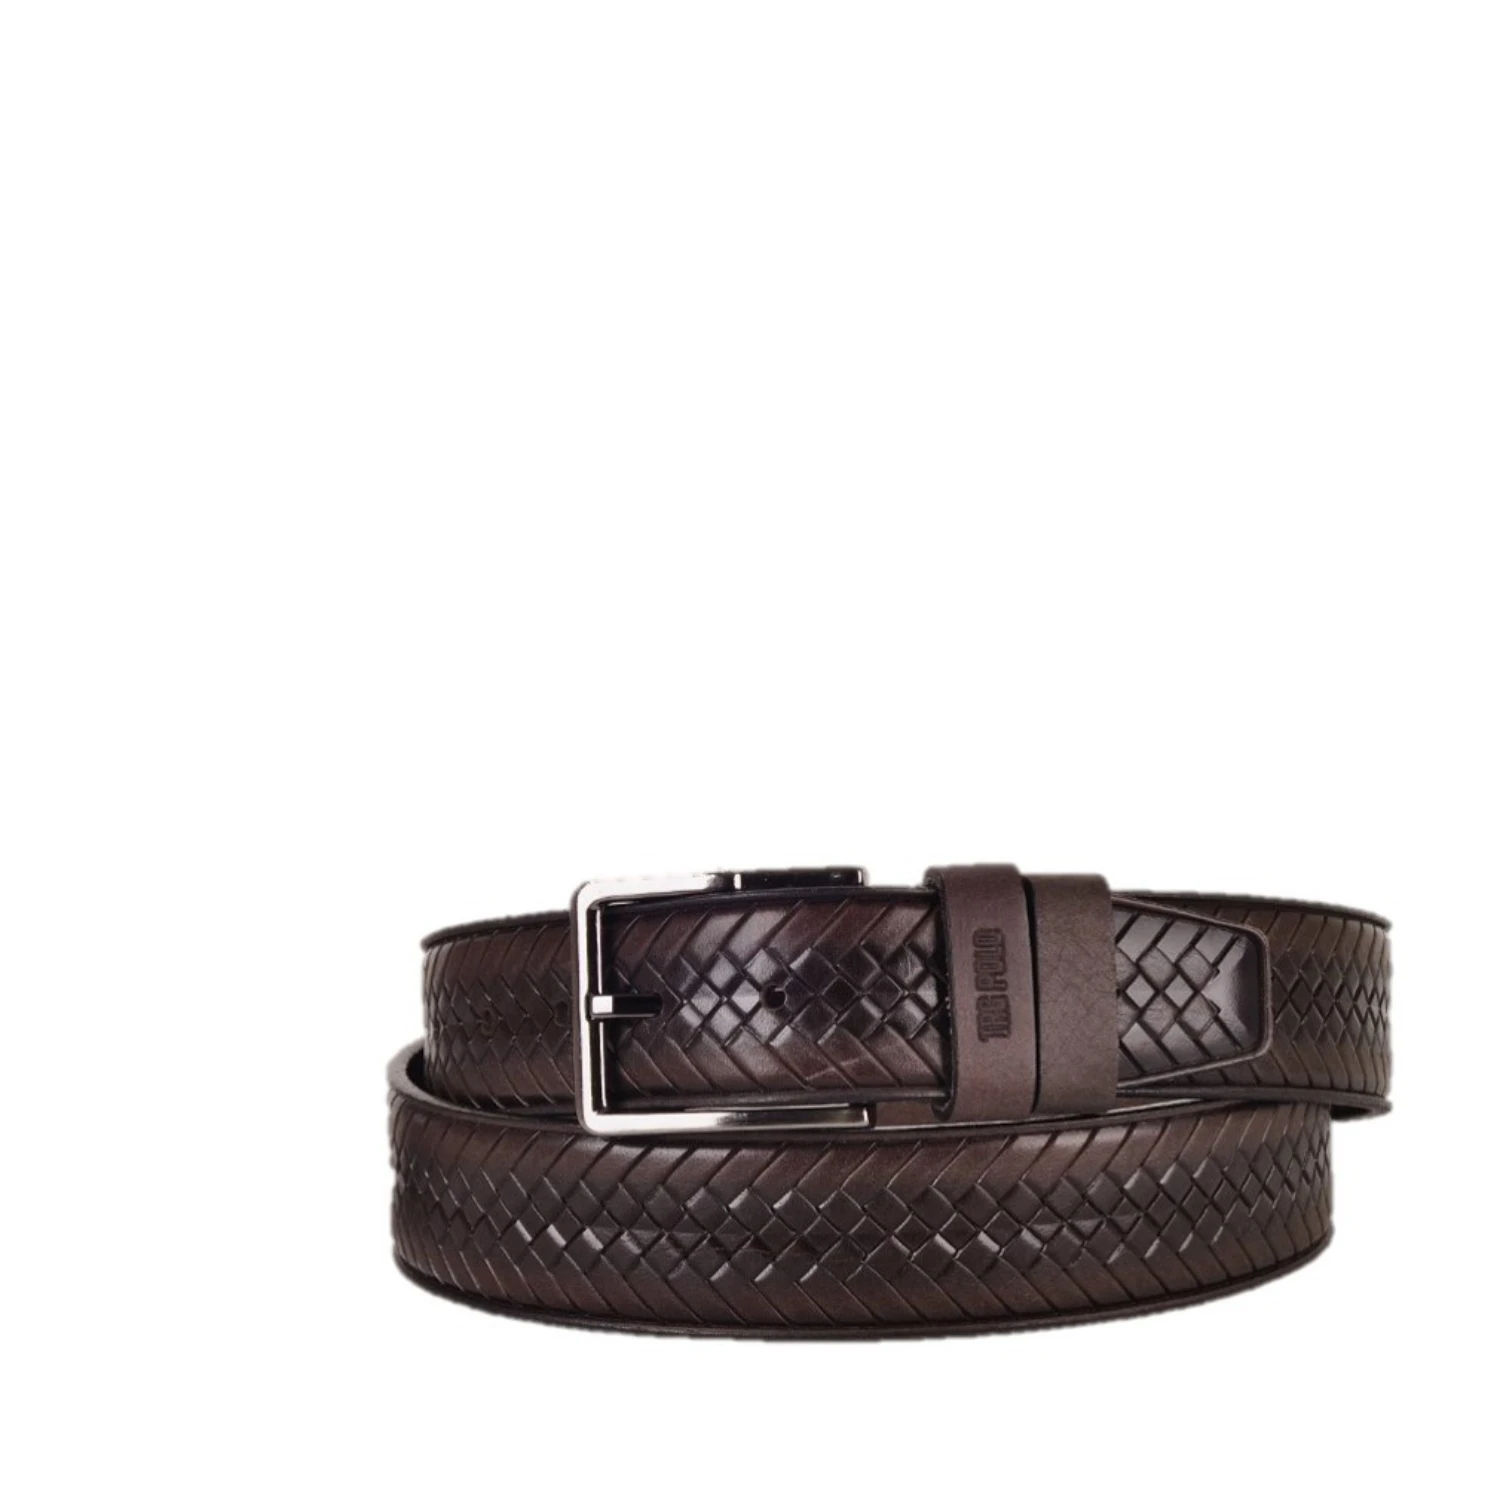 TRG POLO TRG080 GENUINE LEATHER MEN BELT TWO DIFFRENT COLORS